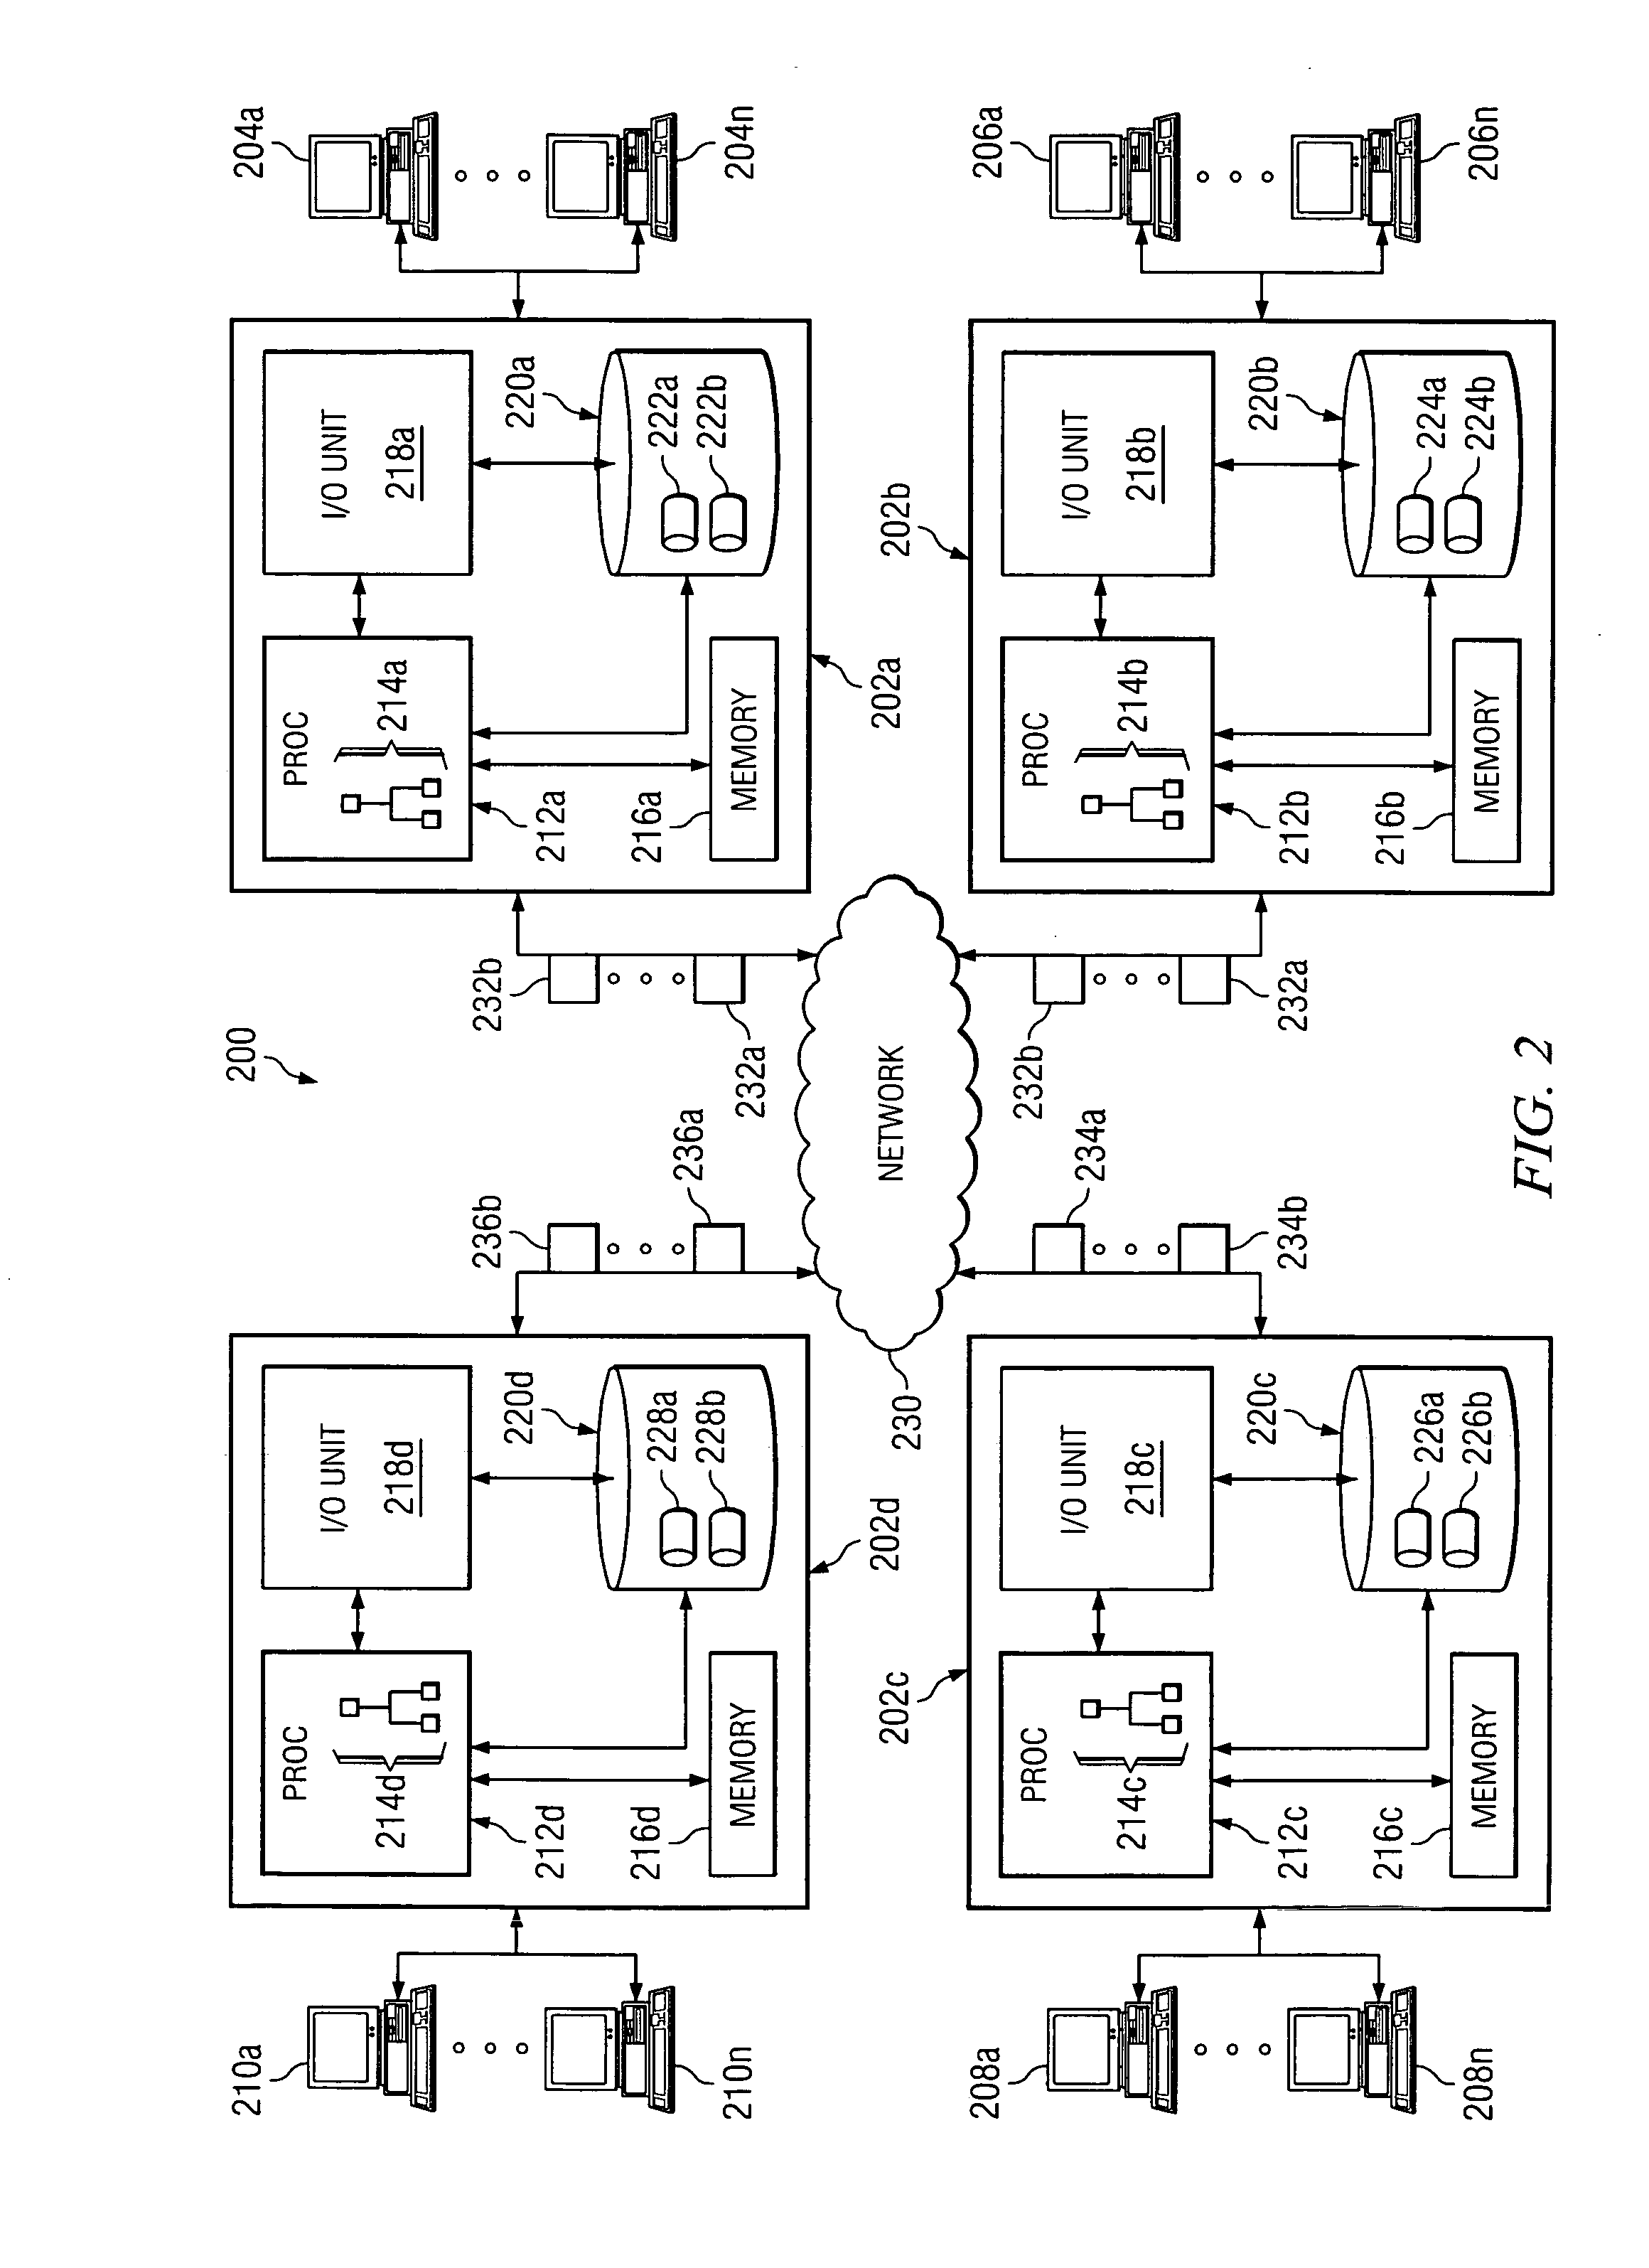 System and method for managing a continuing education program